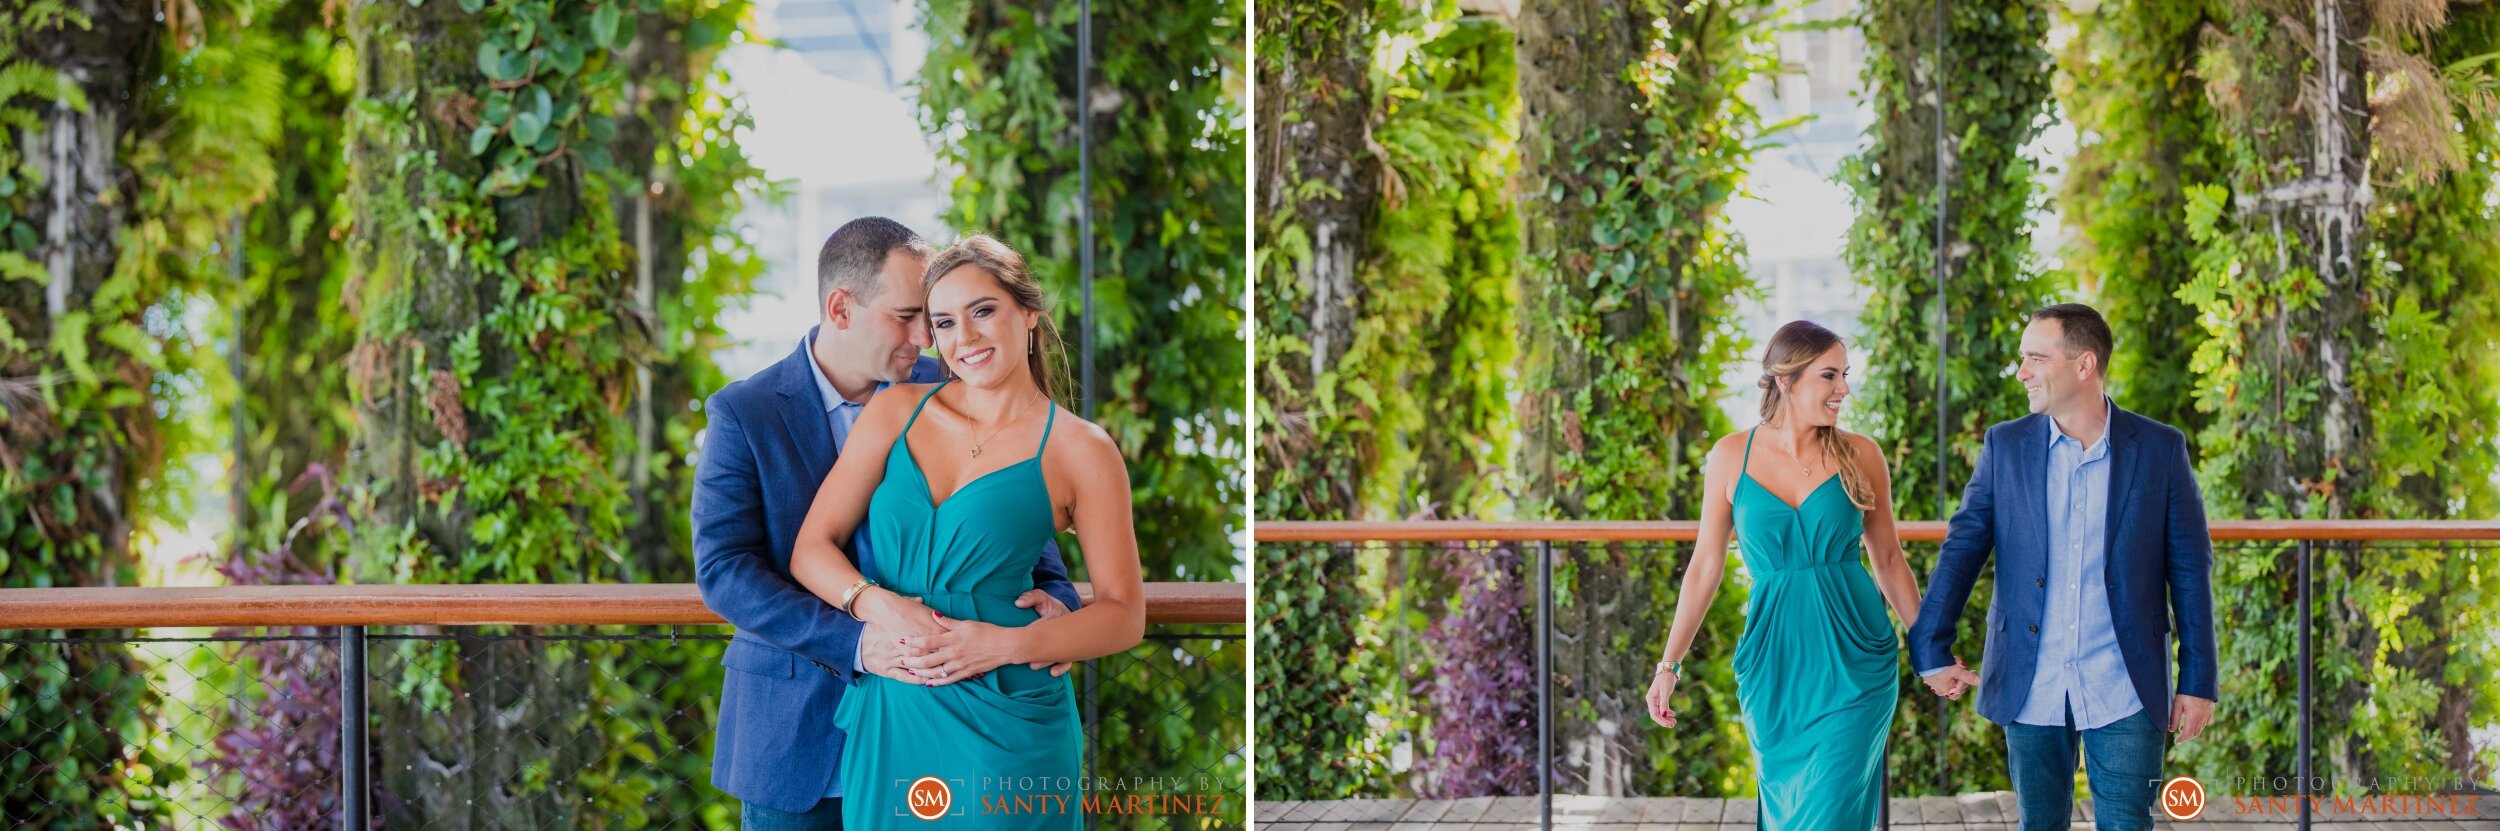 Firefighter Engagement Session Miami - Photography by Santy Martinez 2.jpg